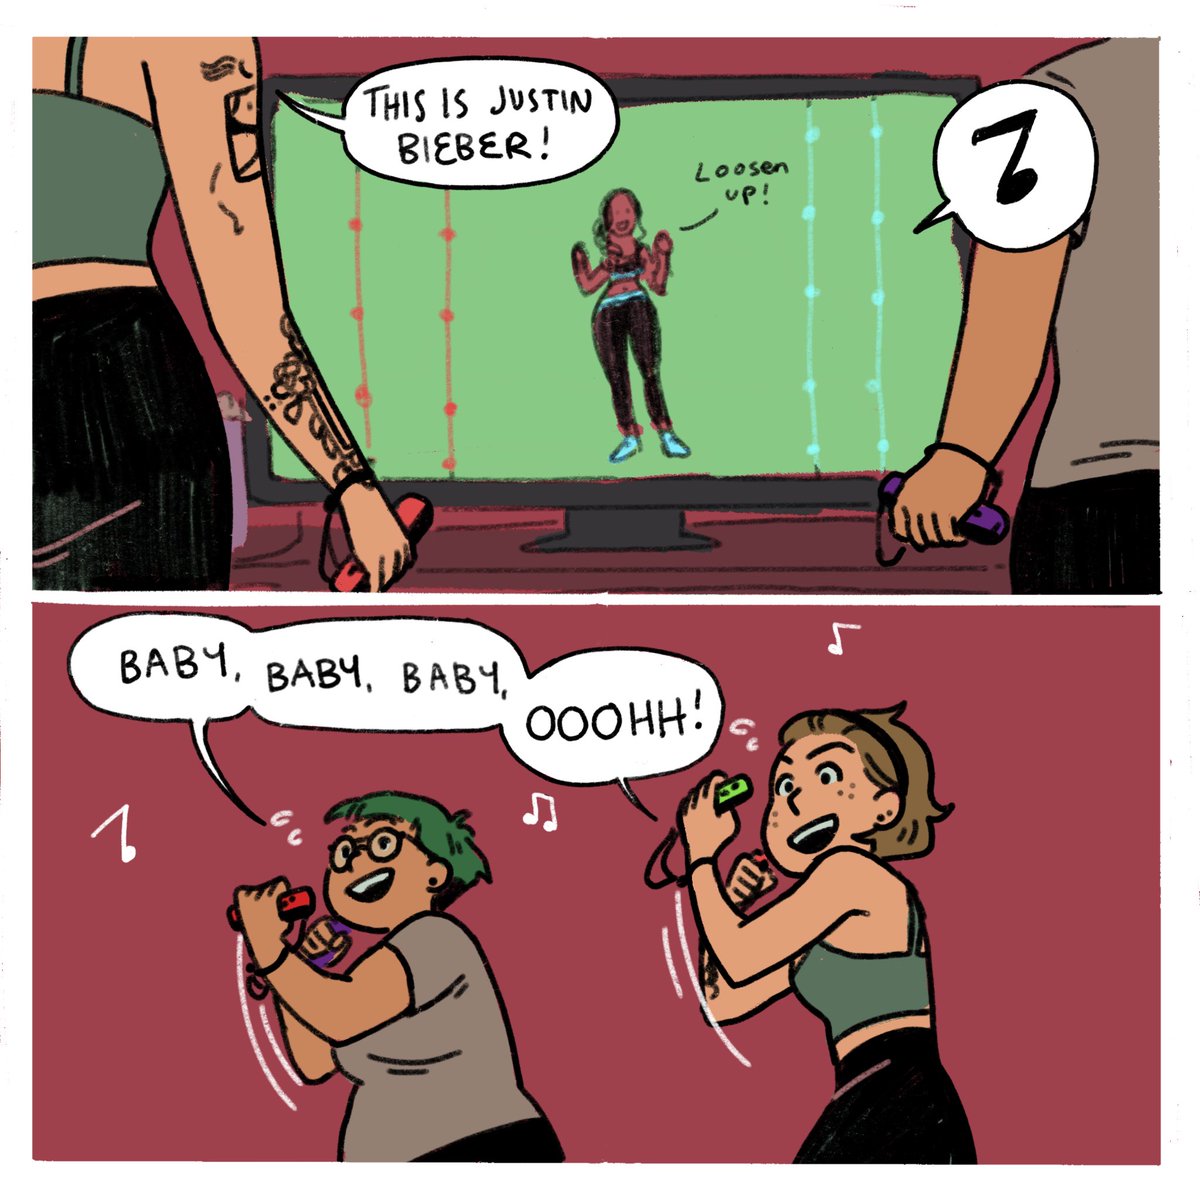 Jade and I have been playing a boxing fitness game to stay a bit active inside!